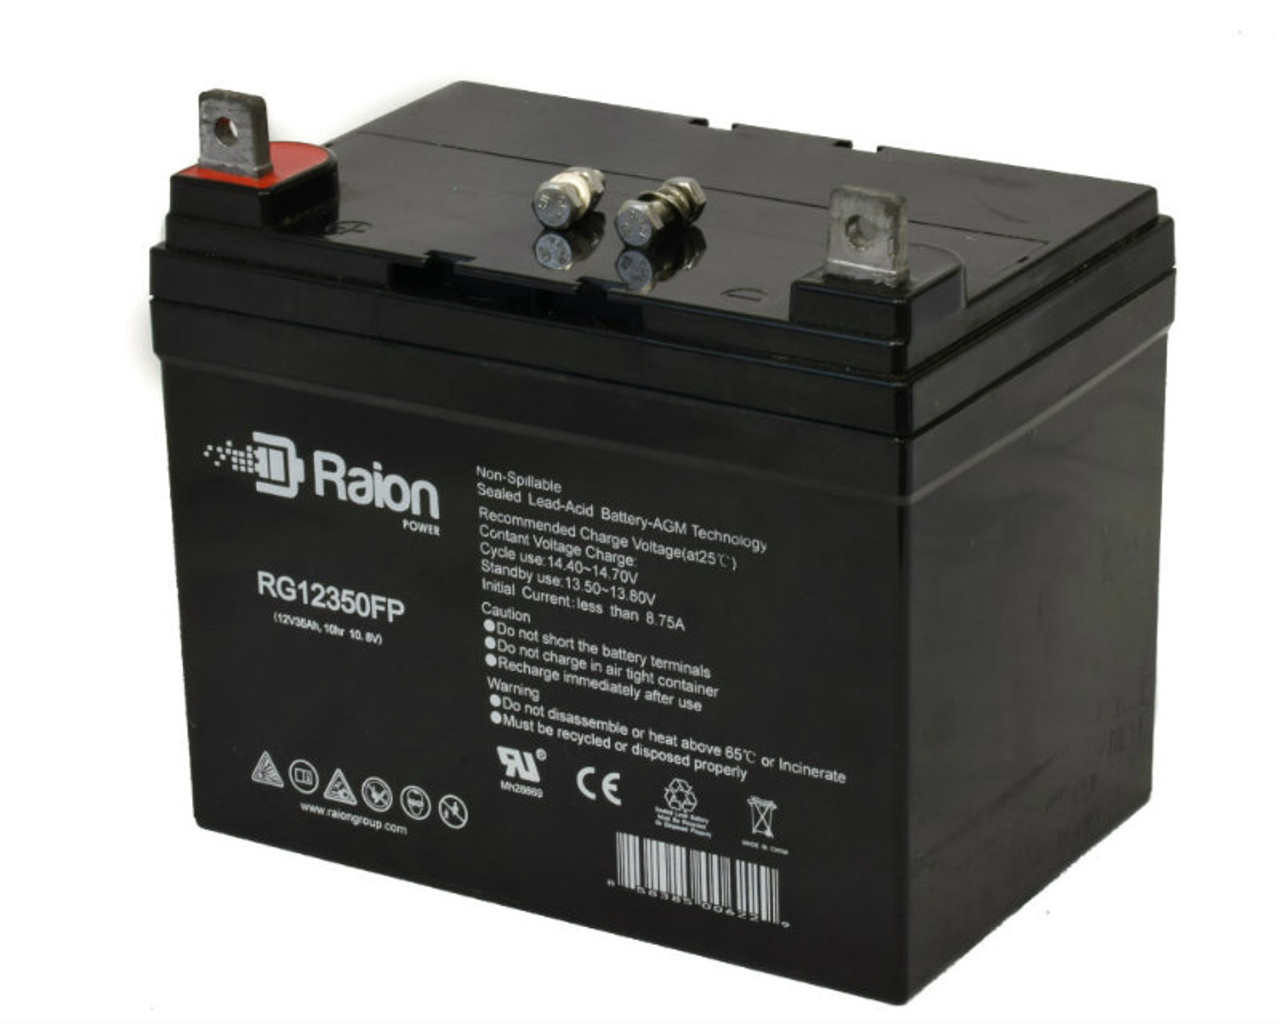 Raion Power Replacement 12V 35Ah RG12350FP Battery for Spriit 1650H